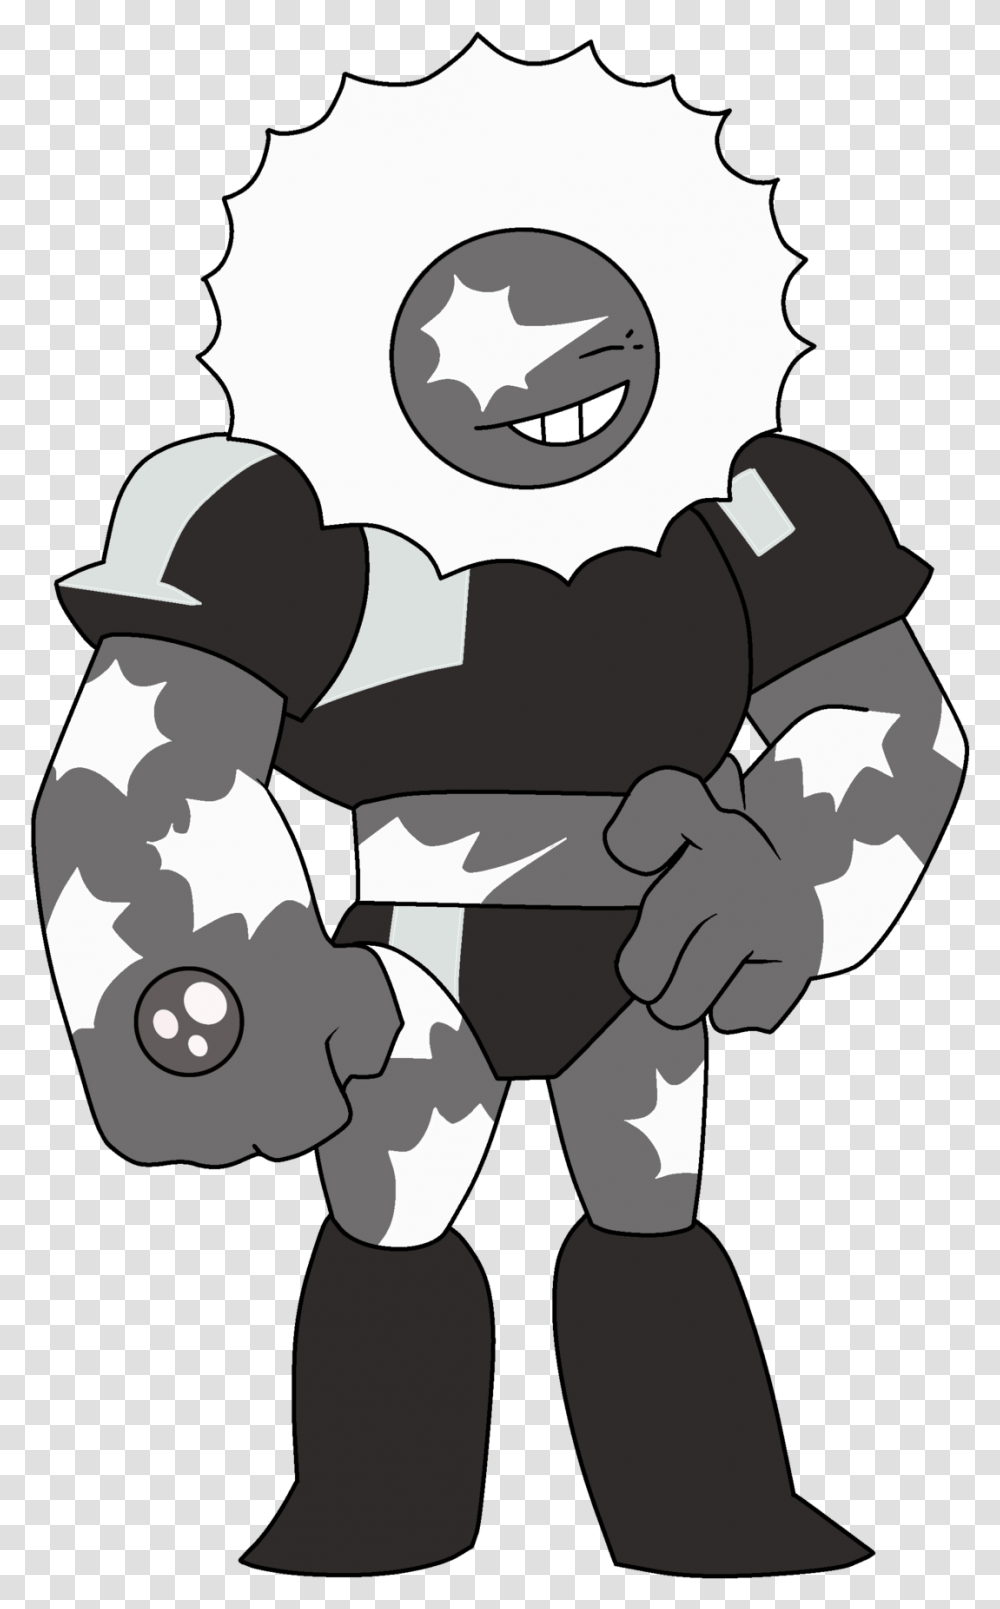 Snowflake Made A Snowflake Obsidian Based On The Snowflake Obsidian Steven Universe, Face, Person, Human, Stencil Transparent Png